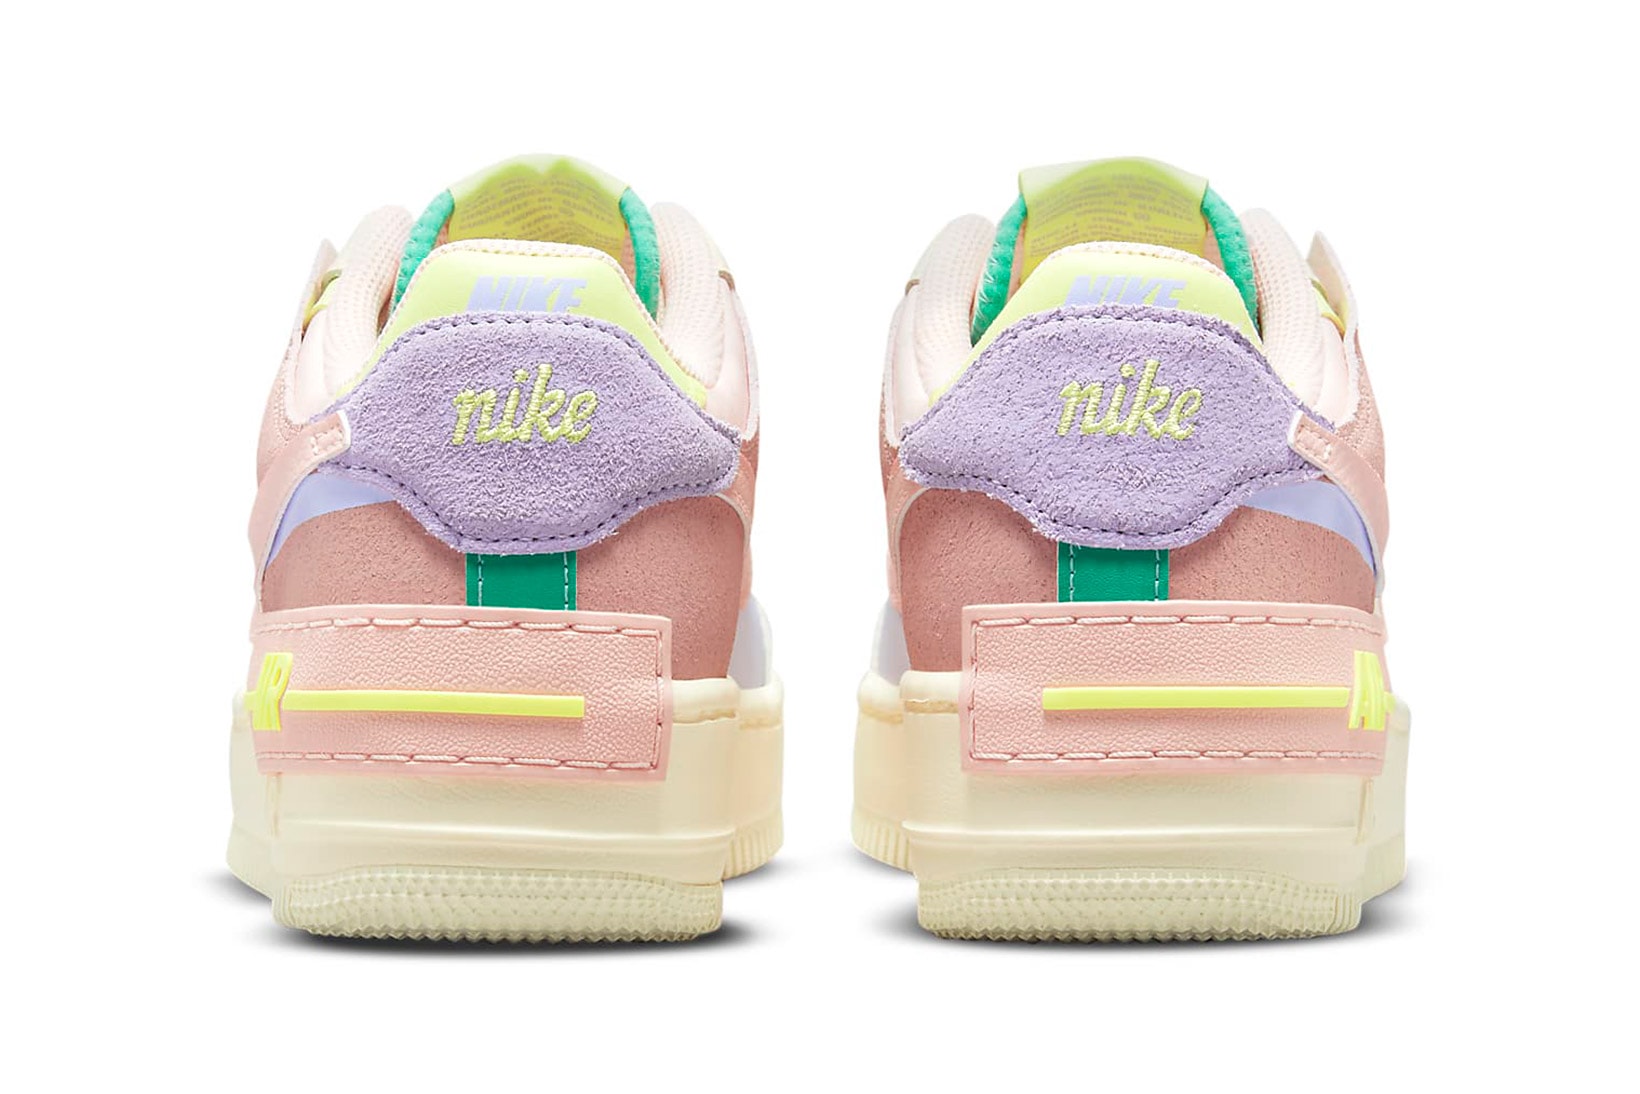 Nike Air Force 1 AF1 Shadow Cashmere Pure Violet Pink Oxford Pale Coral Purple Cream Yellow Green Sneakers Footwear Shoes Kicks